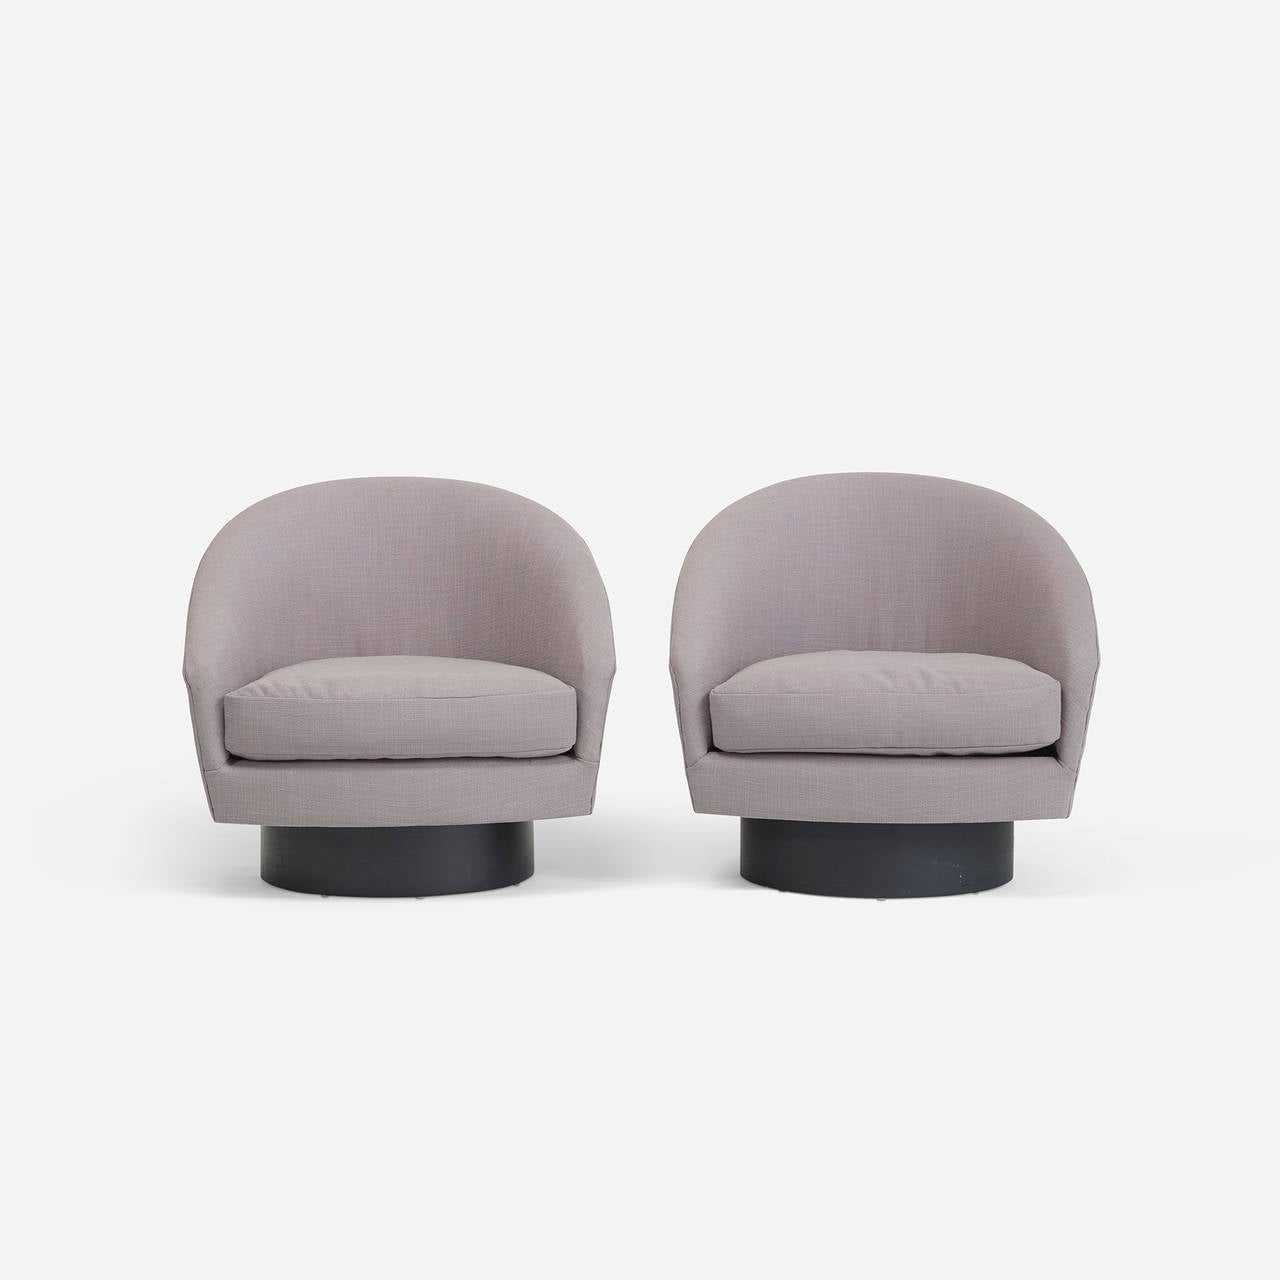 American Swivel Lounge Chairs, Pair by Adrian Pearsall for Craft Associates